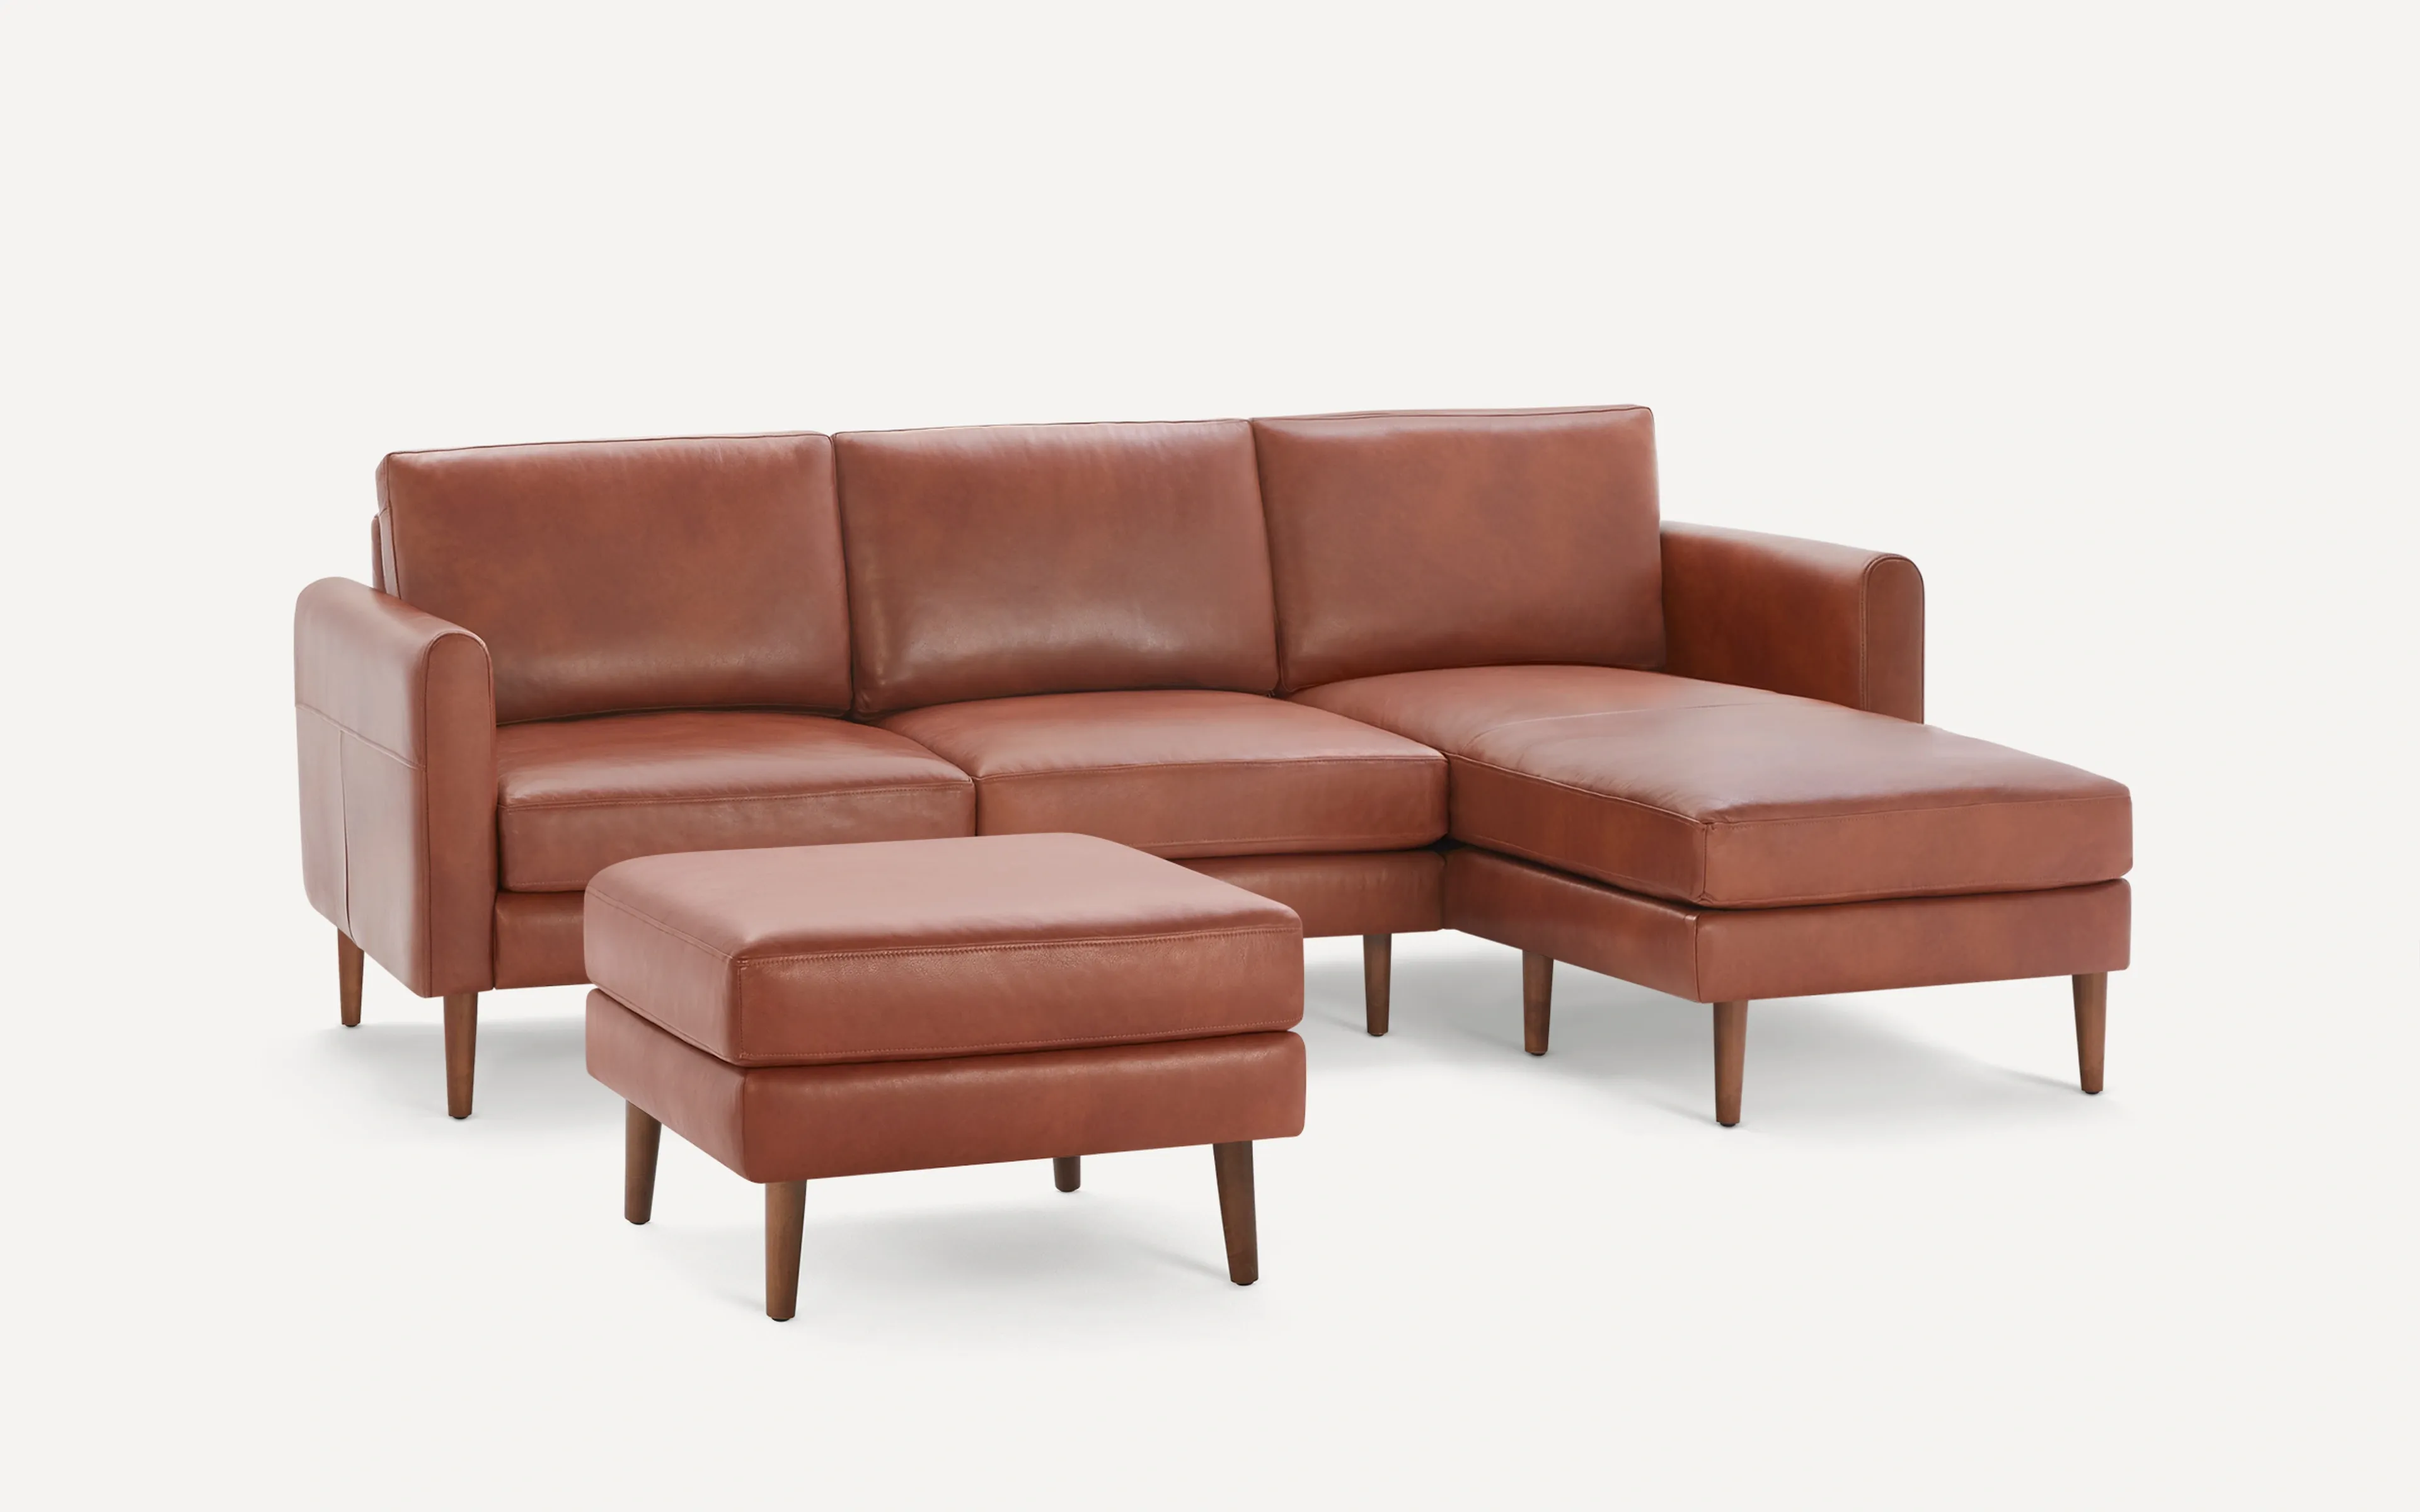 Original Nomad Chaise Sofa in Chestnut Leather